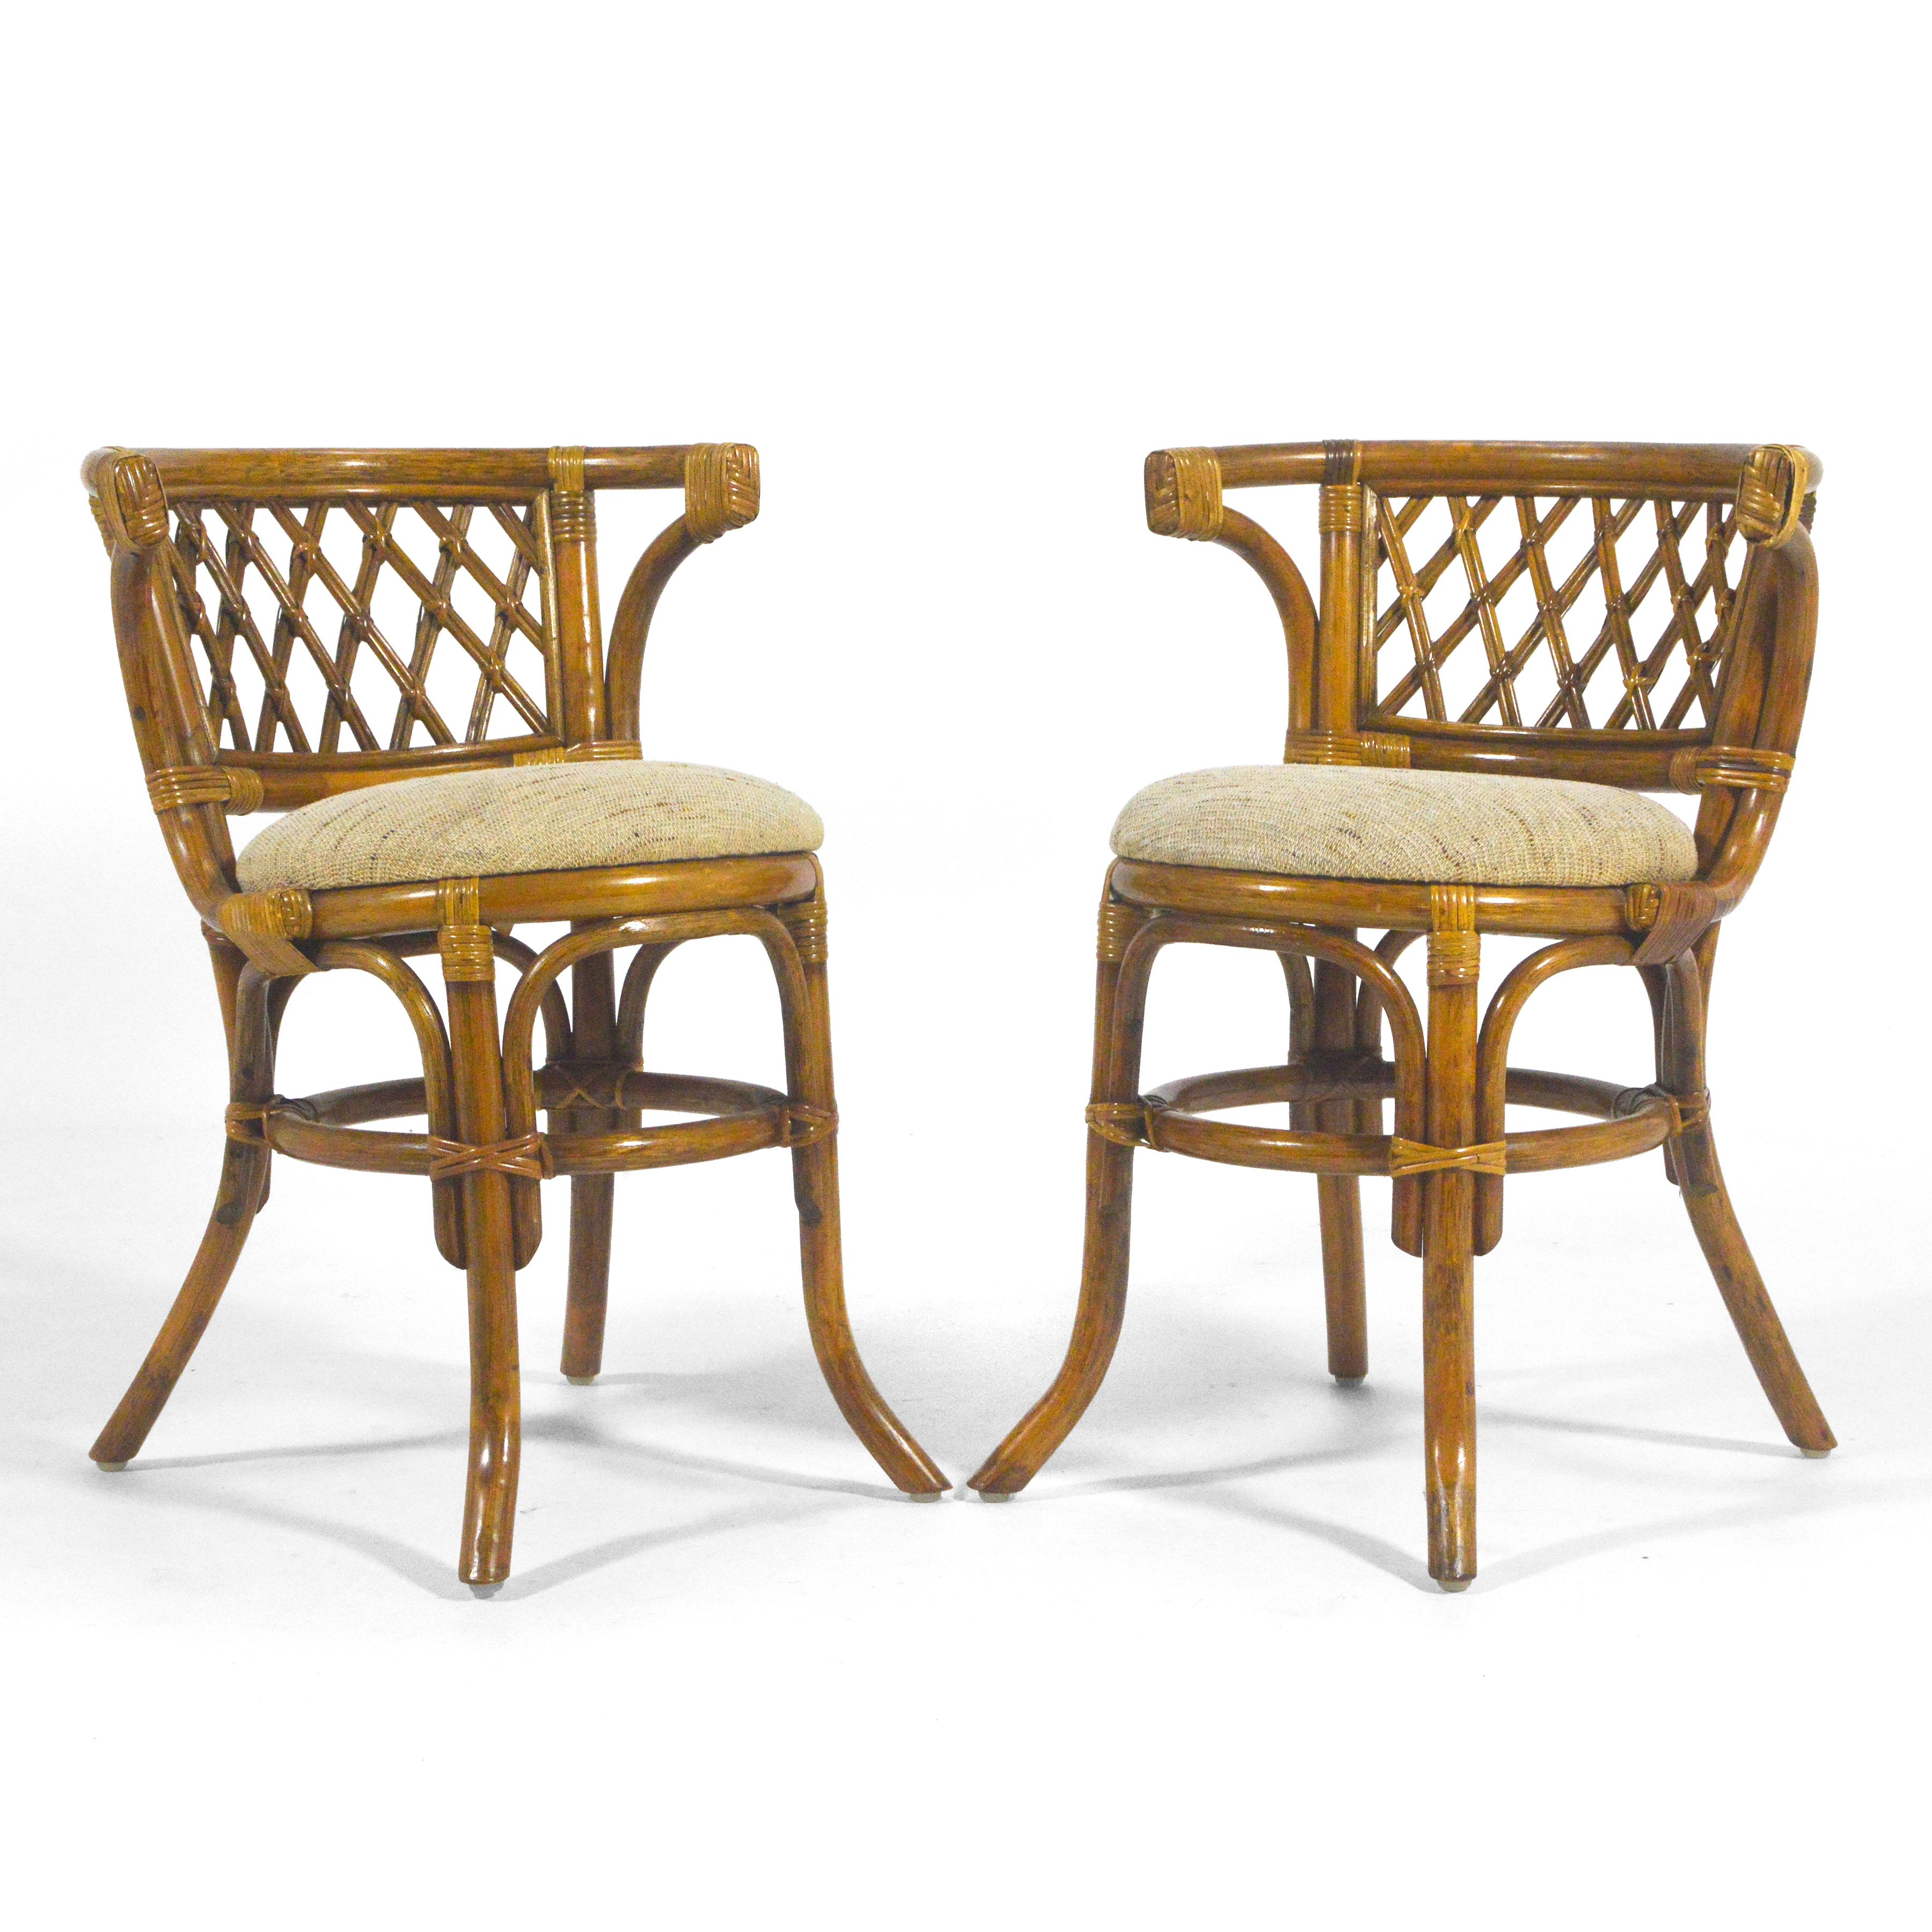 This lovely little rattan and cane set made by P.T. Chain in the late 1970s includes a small table with an oval glass top and two chairs that fit under the table, creating a compact footprint. Perfect as a breakfast table or game table, the elegant